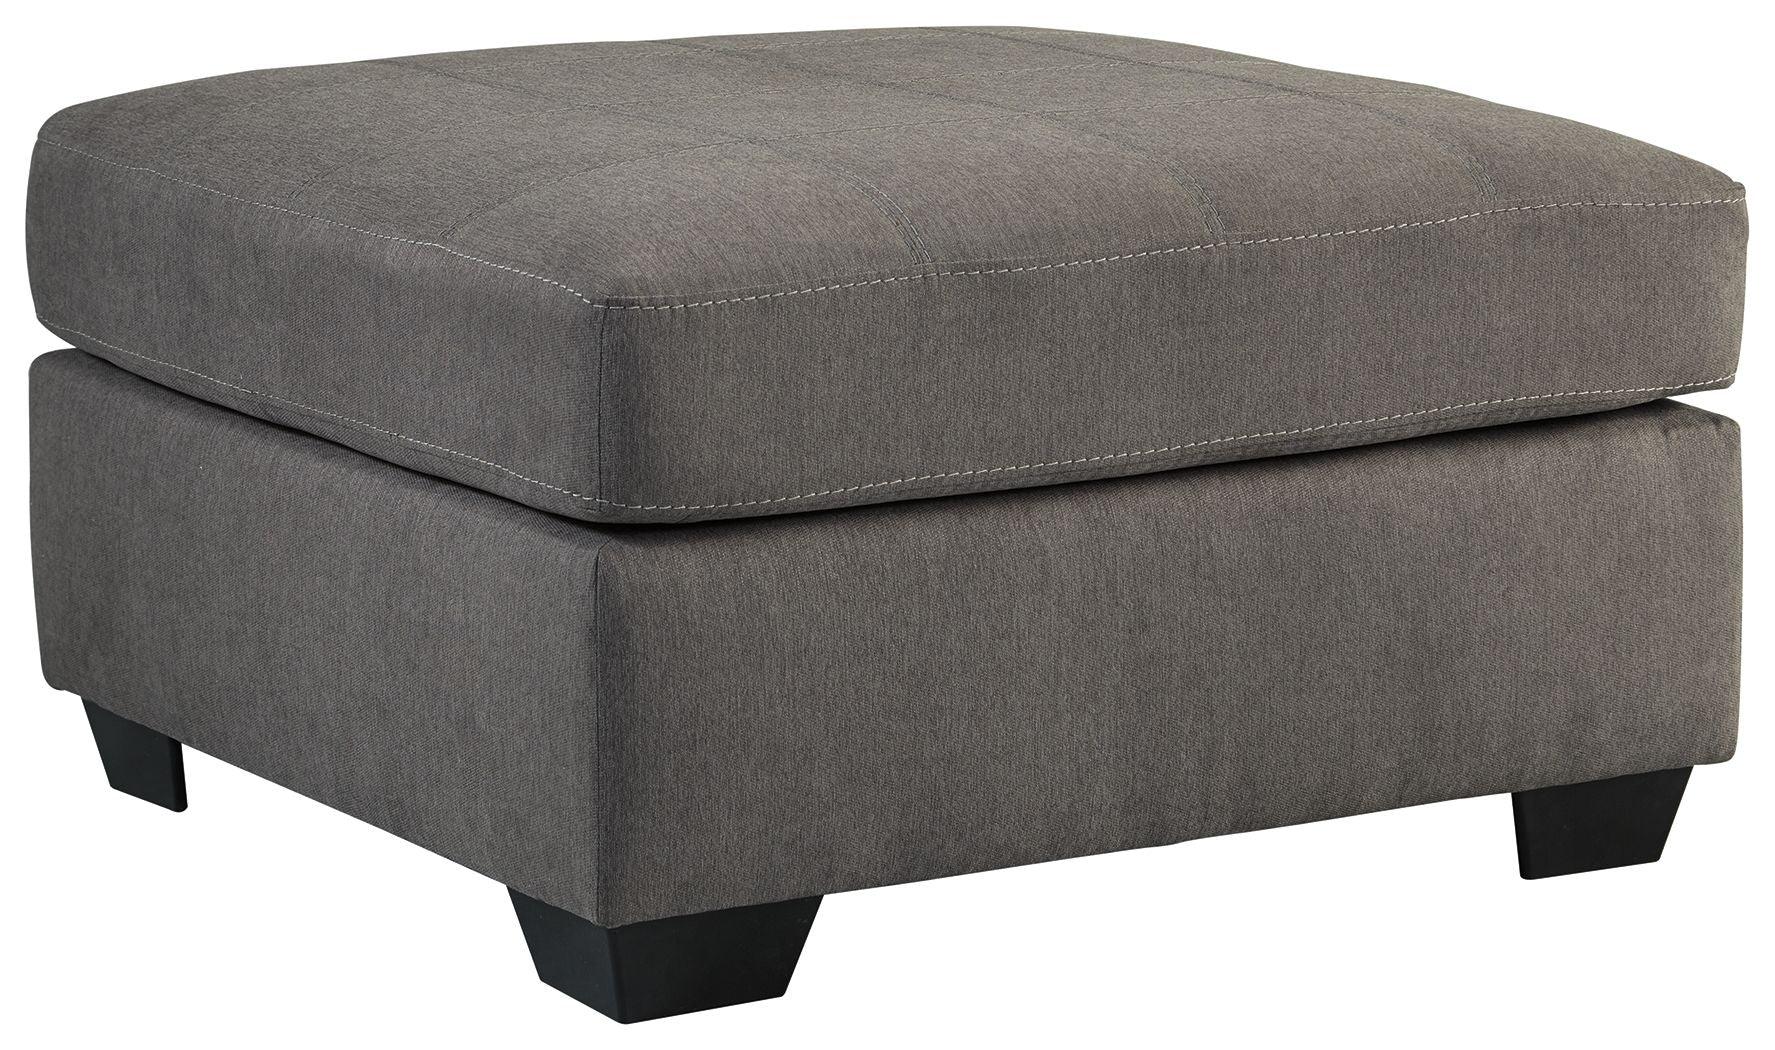 Ashley Furniture - Maier - Oversized Accent Ottoman - 5th Avenue Furniture